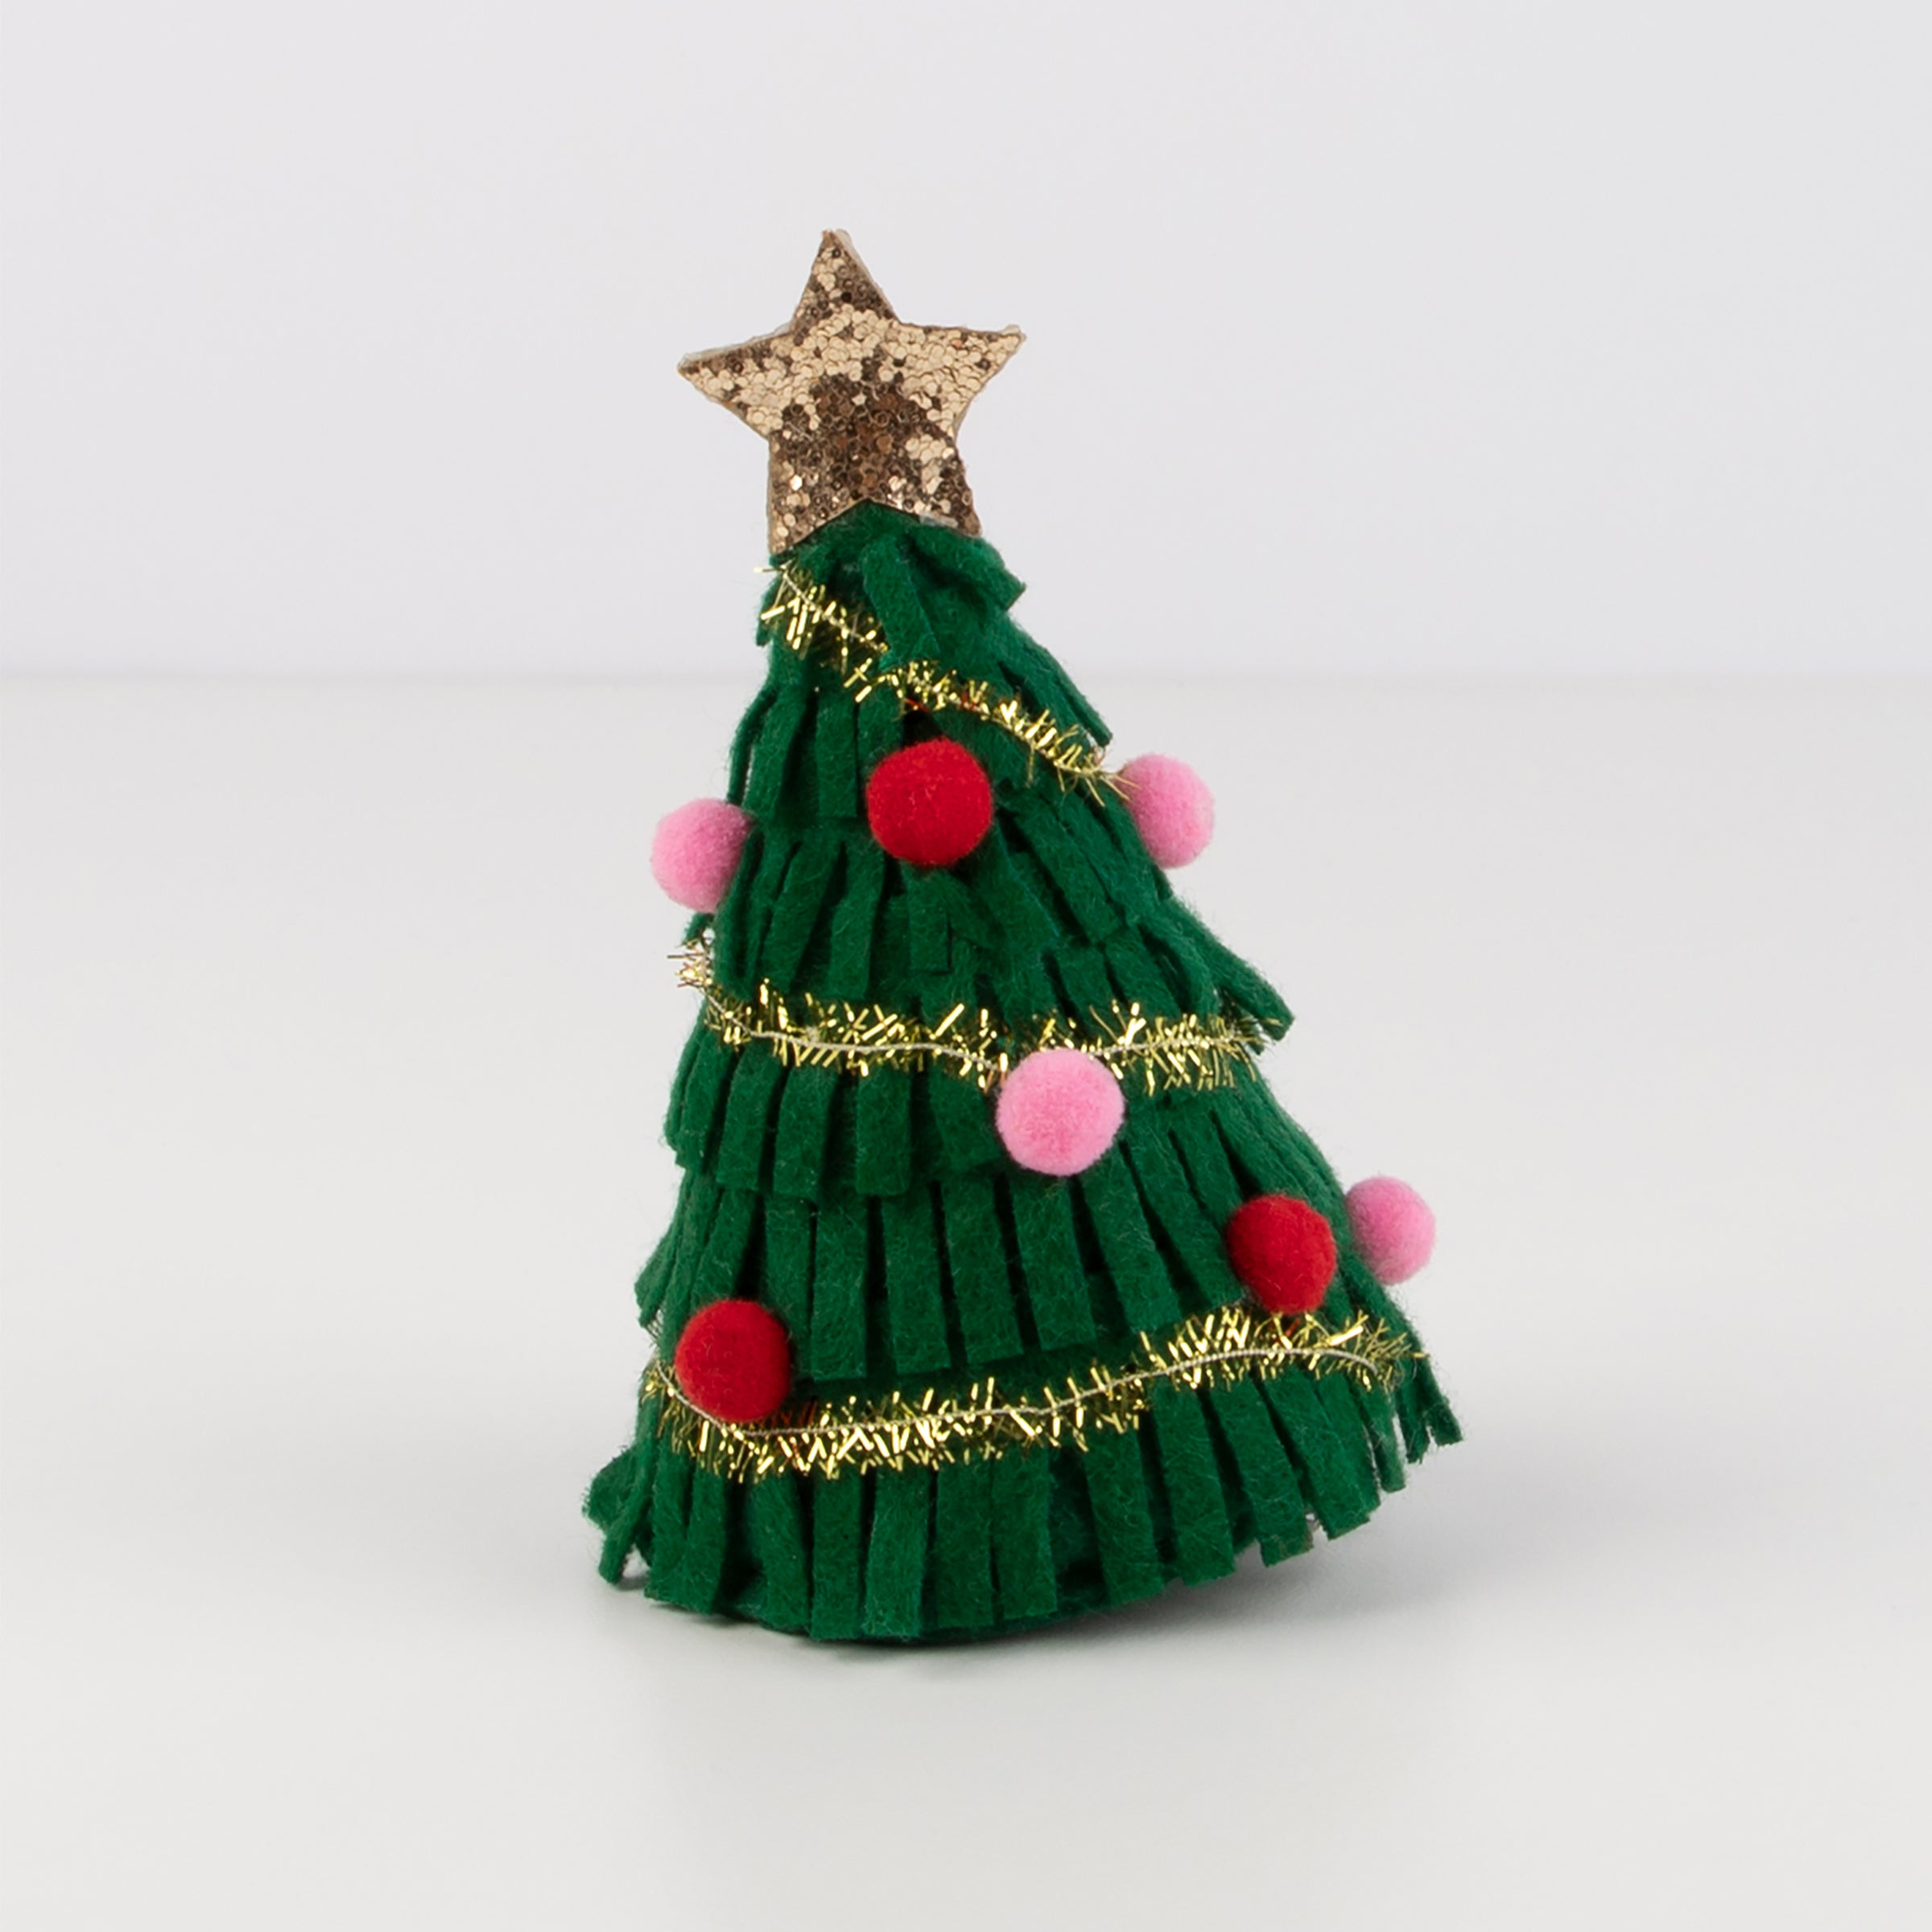 Our Christmas hair accessory is crafted from felt to look like a sparkling Christmas tree.